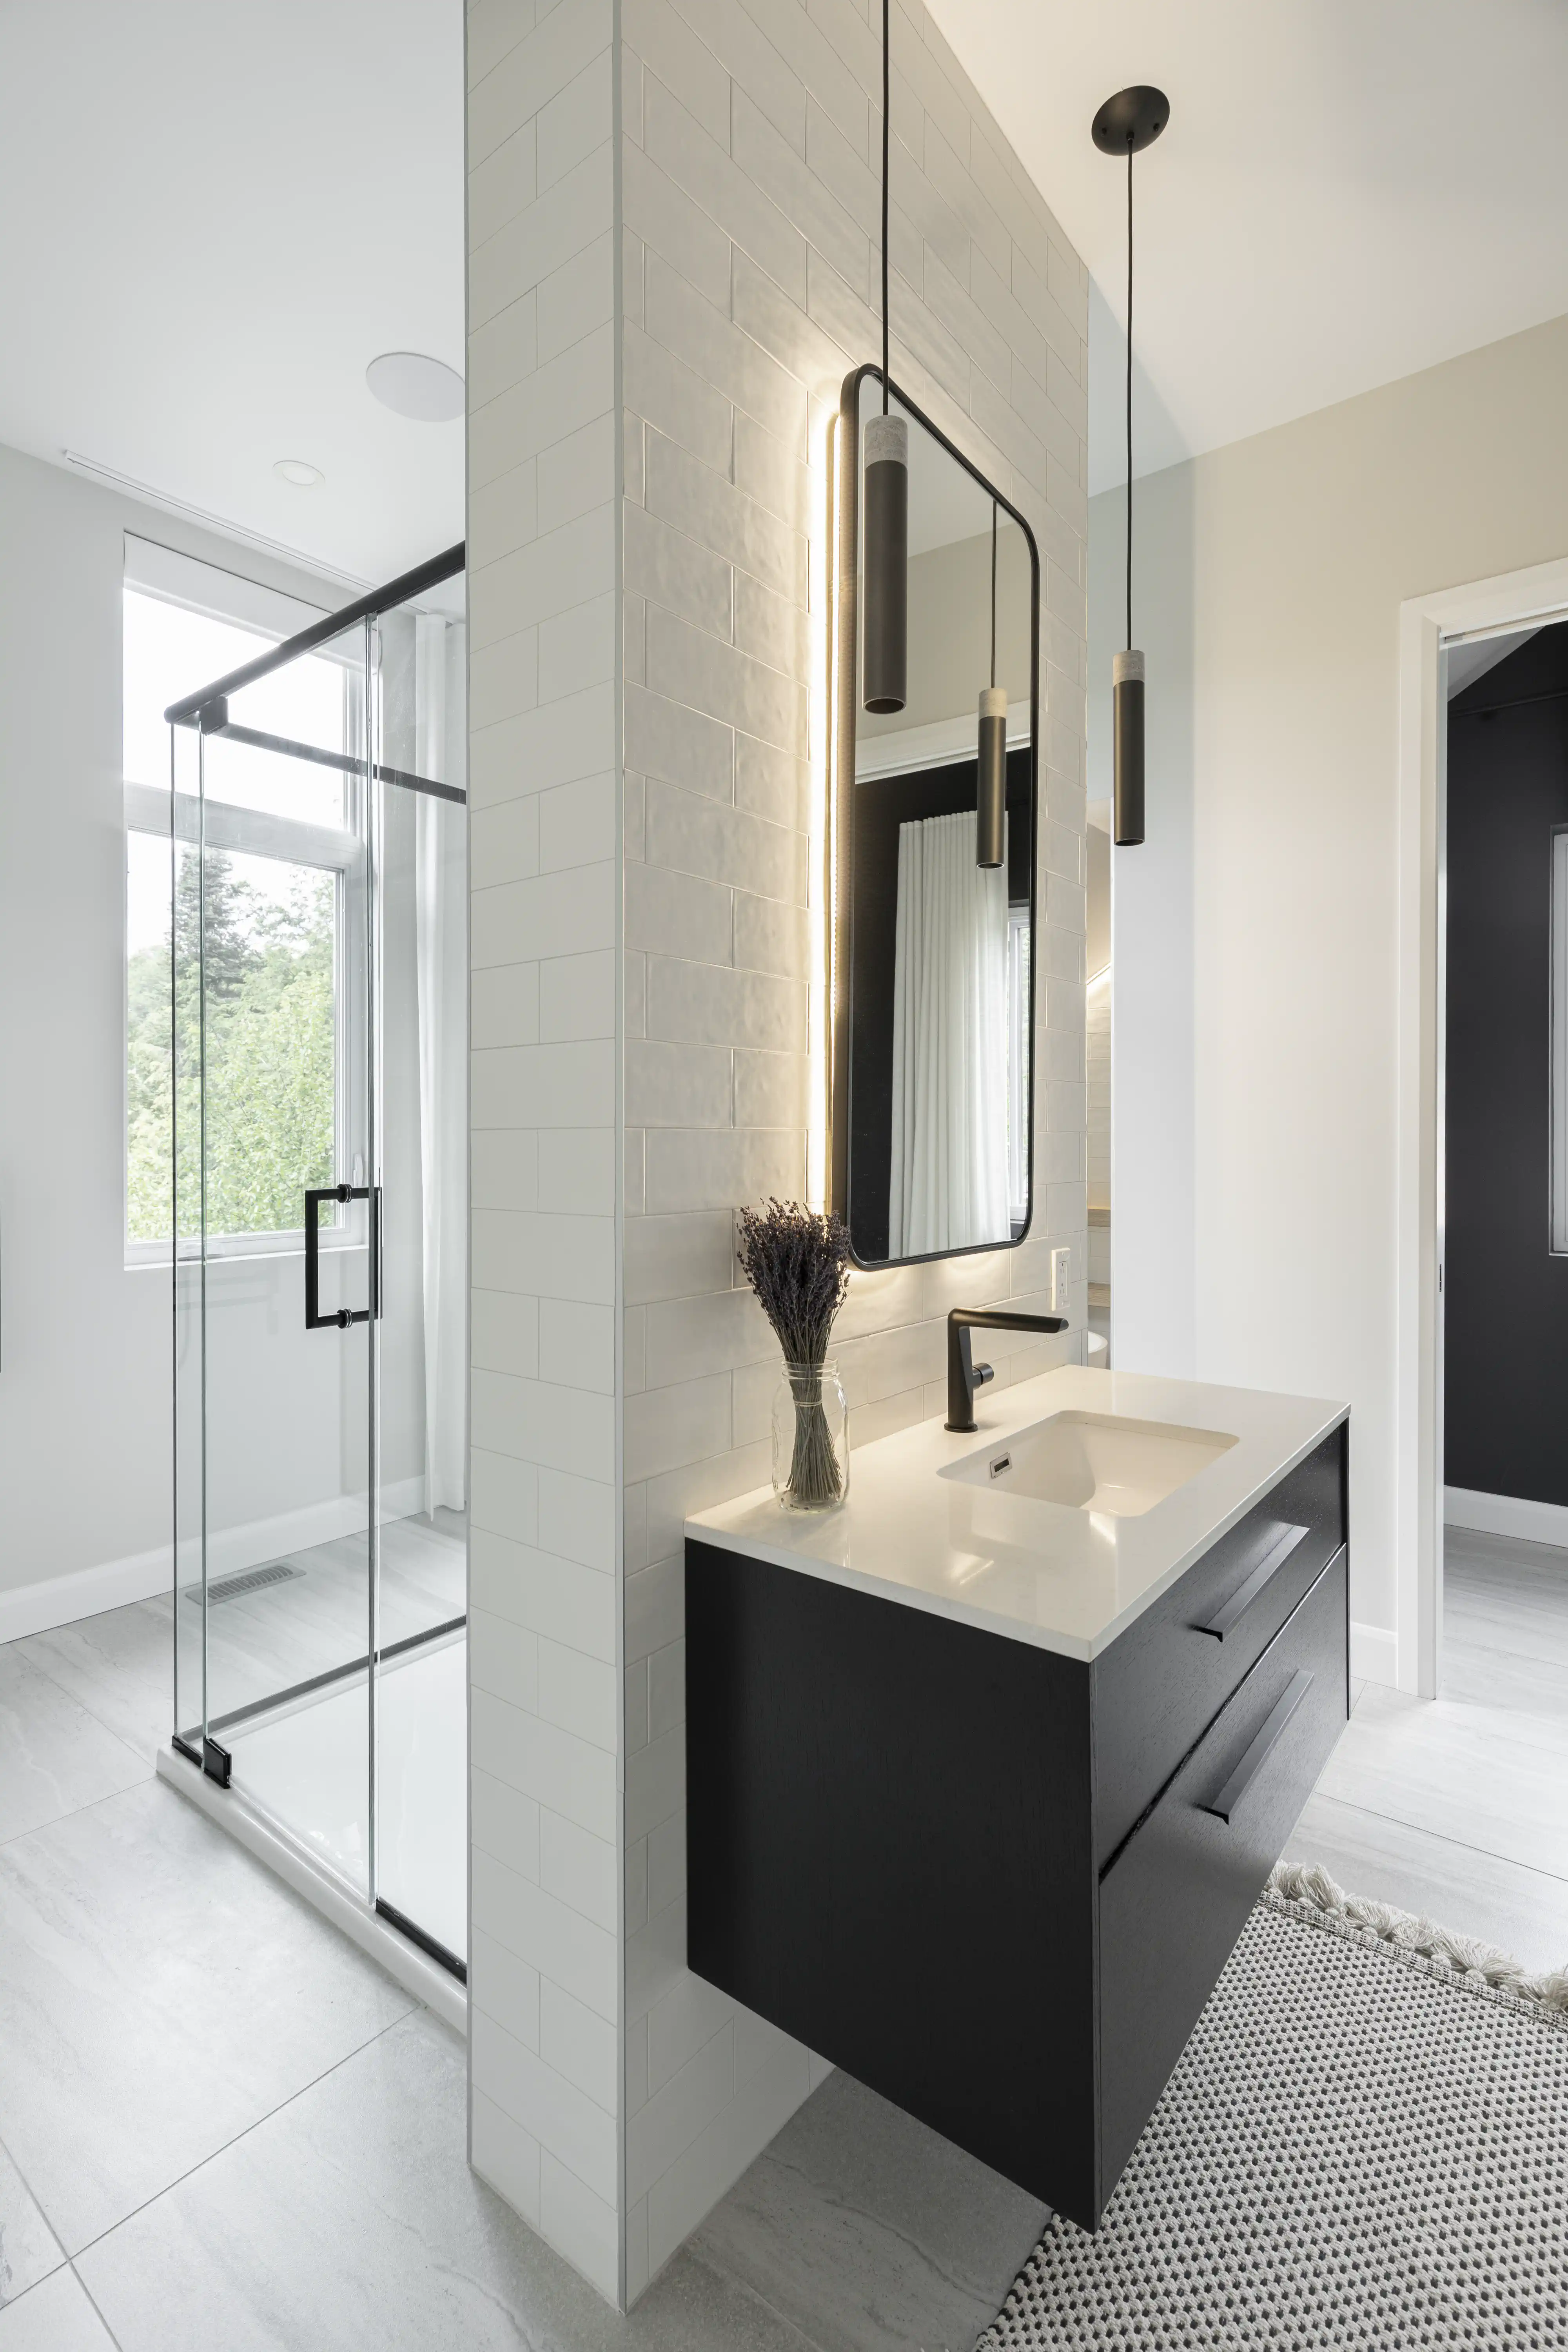 A black and white bathroom with a glass shower enclosure and a window with a view, interior by Sarah Brown Design